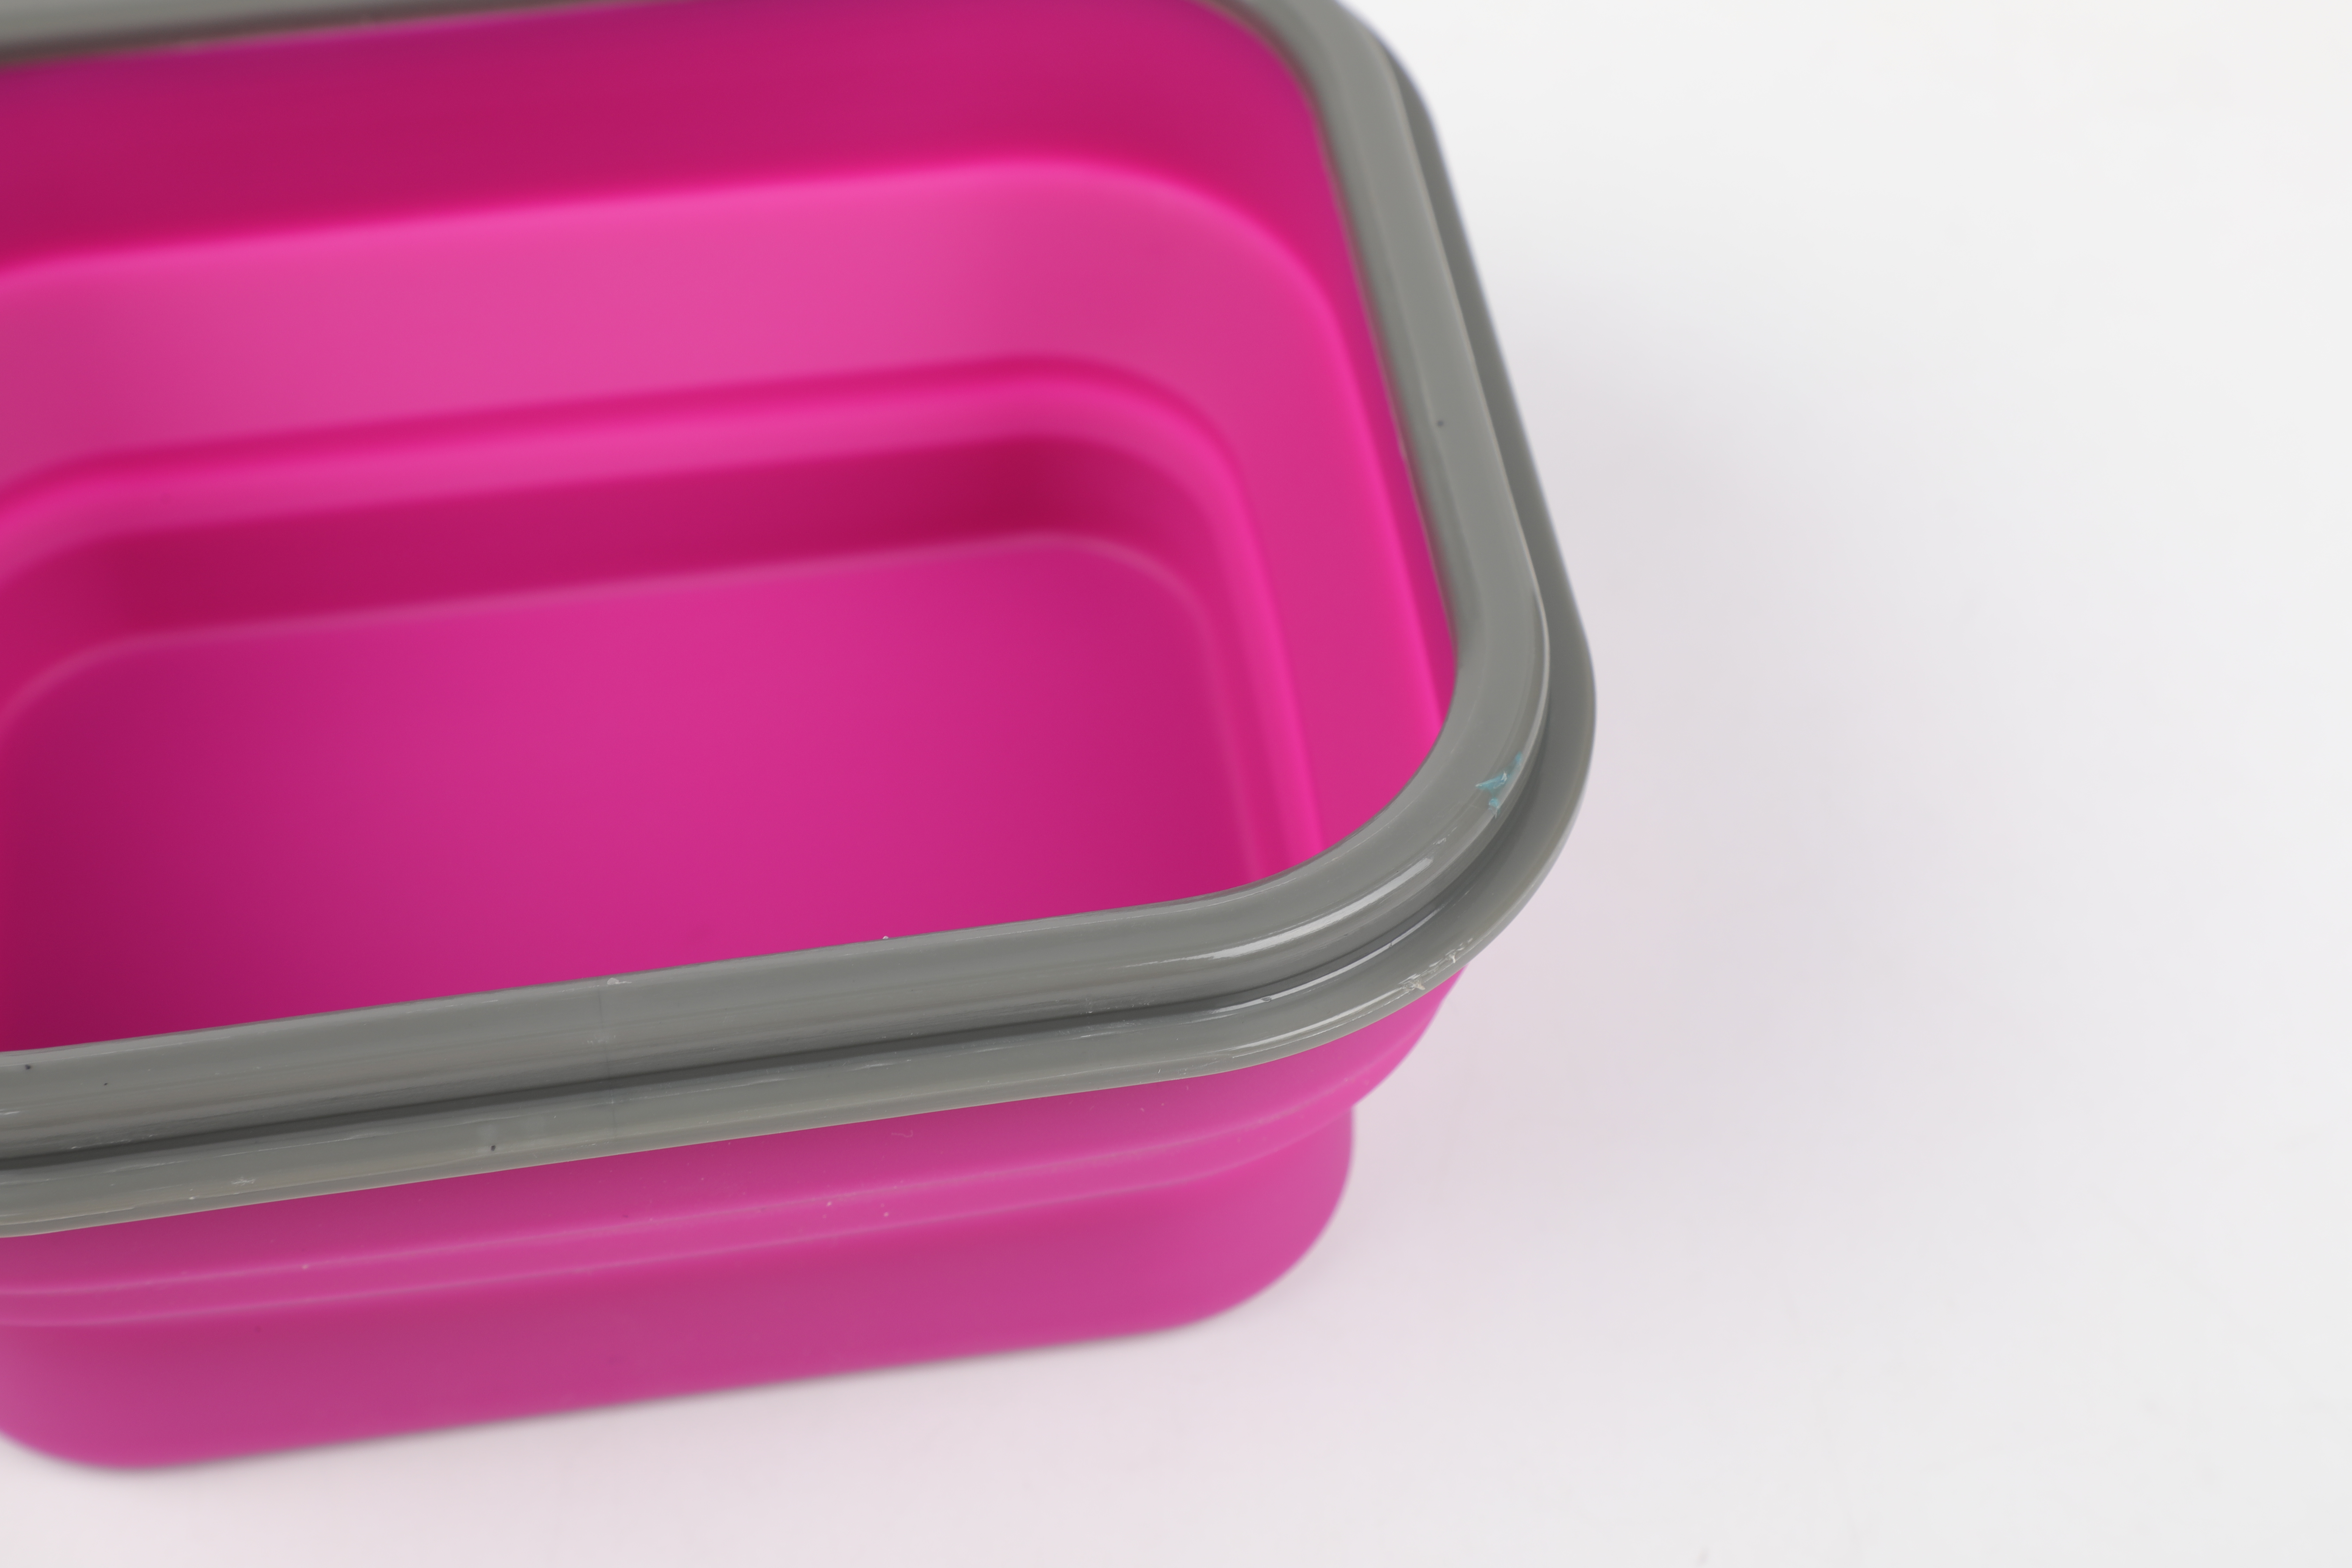 Foldable Lunch Bento Box with Spoon